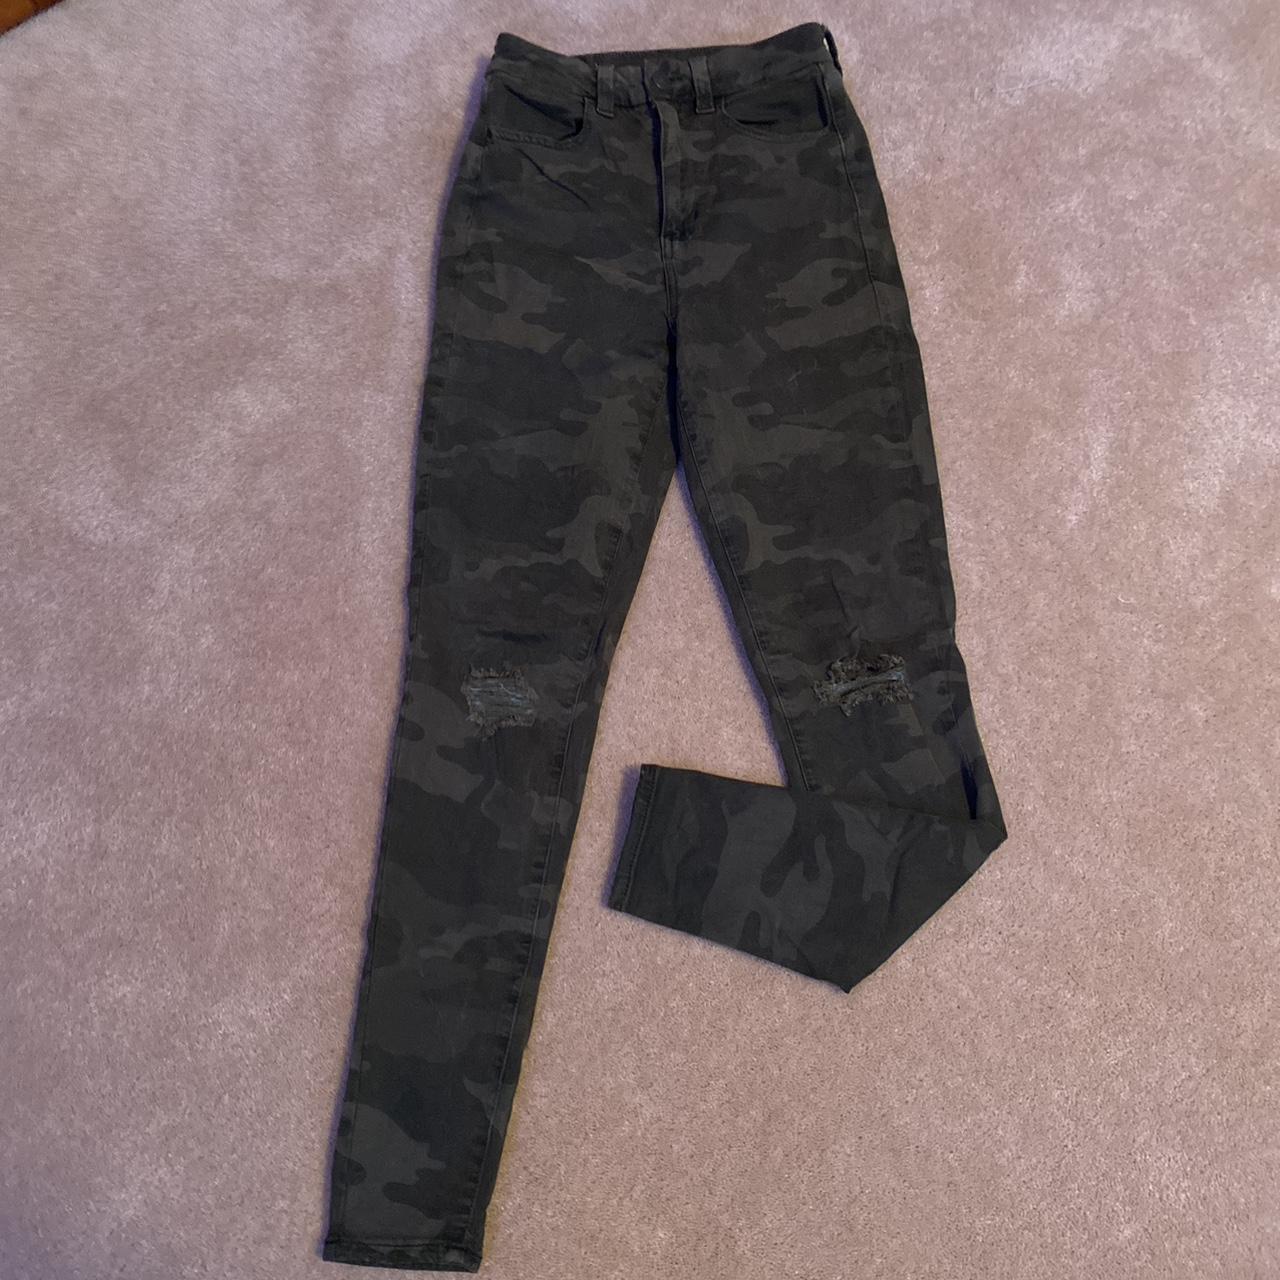 Dark green camo jeggings from AE. Super cute and a - Depop